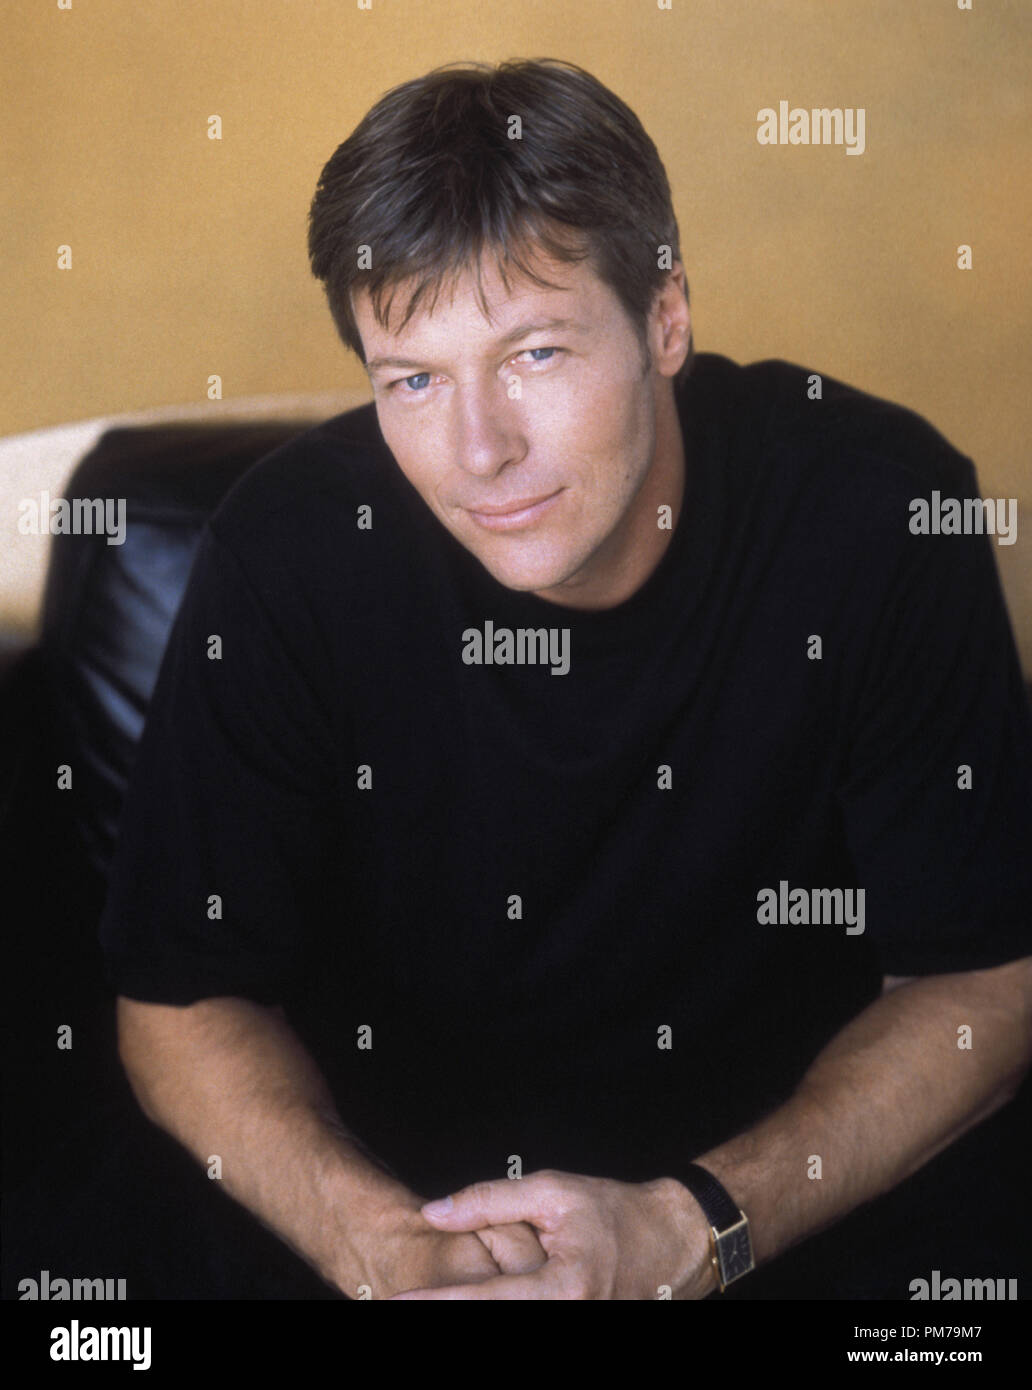 Jack wagner hi-res stock photography and images - Alamy